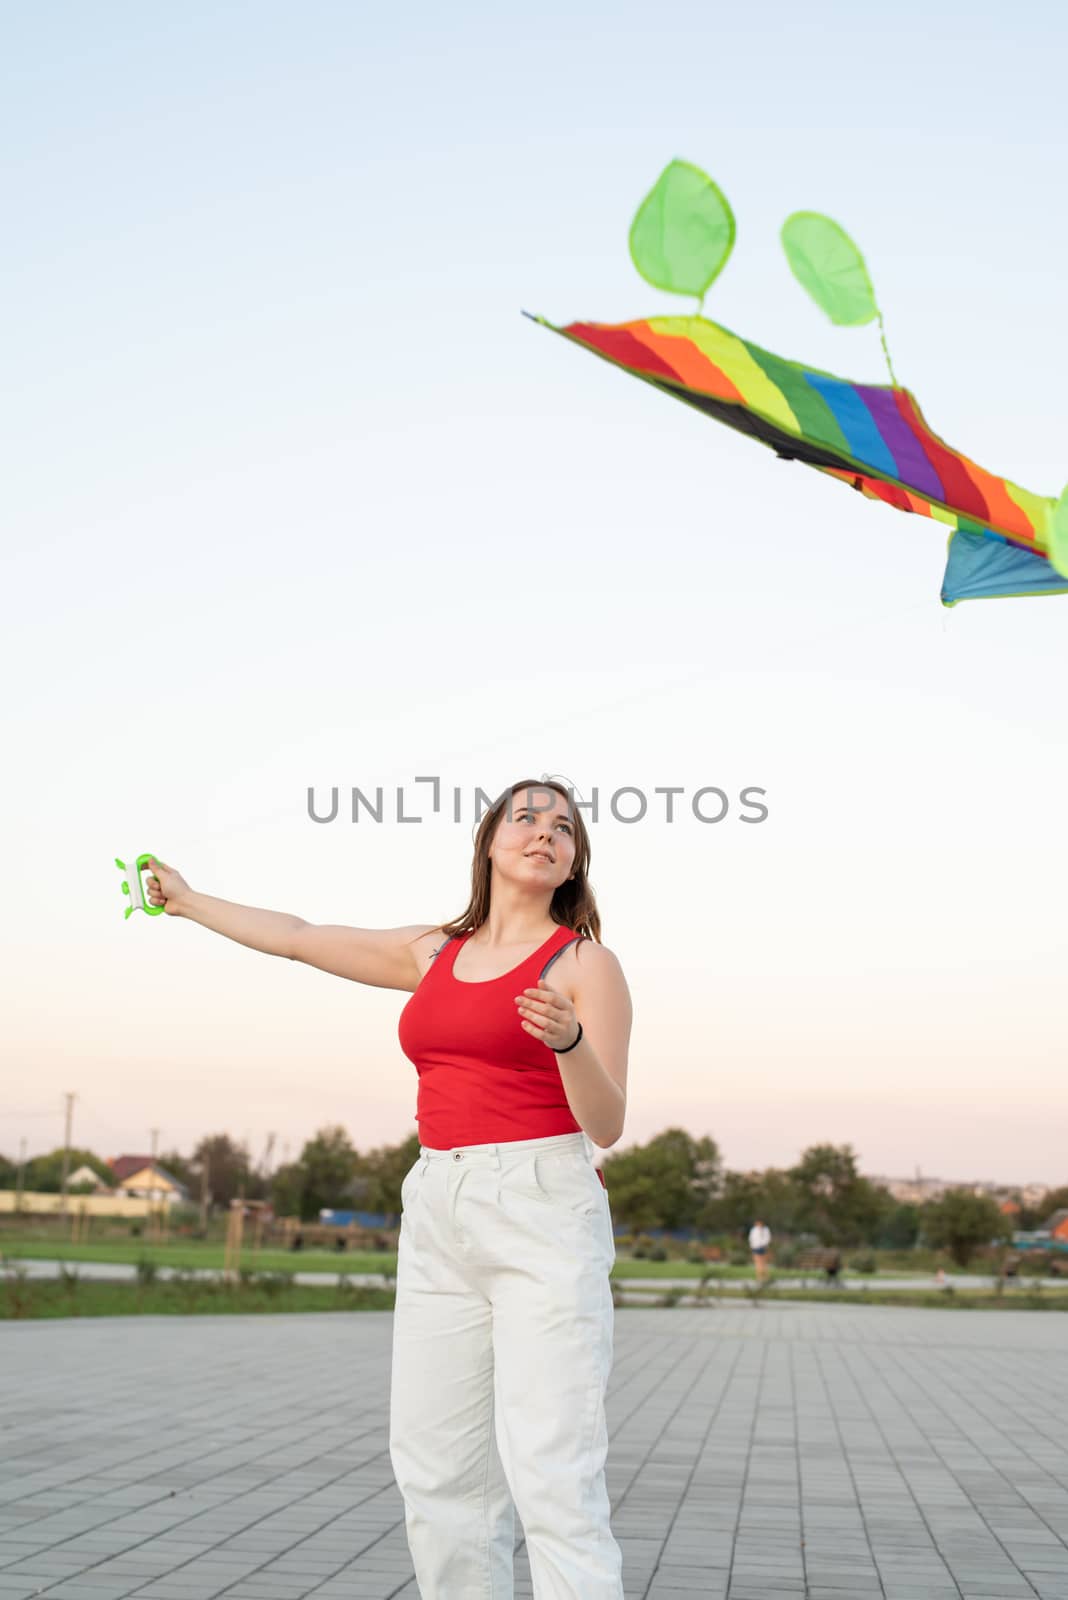 Active lifestyle. Happiness concept. Happy young woman running with a kite in a park at sunset